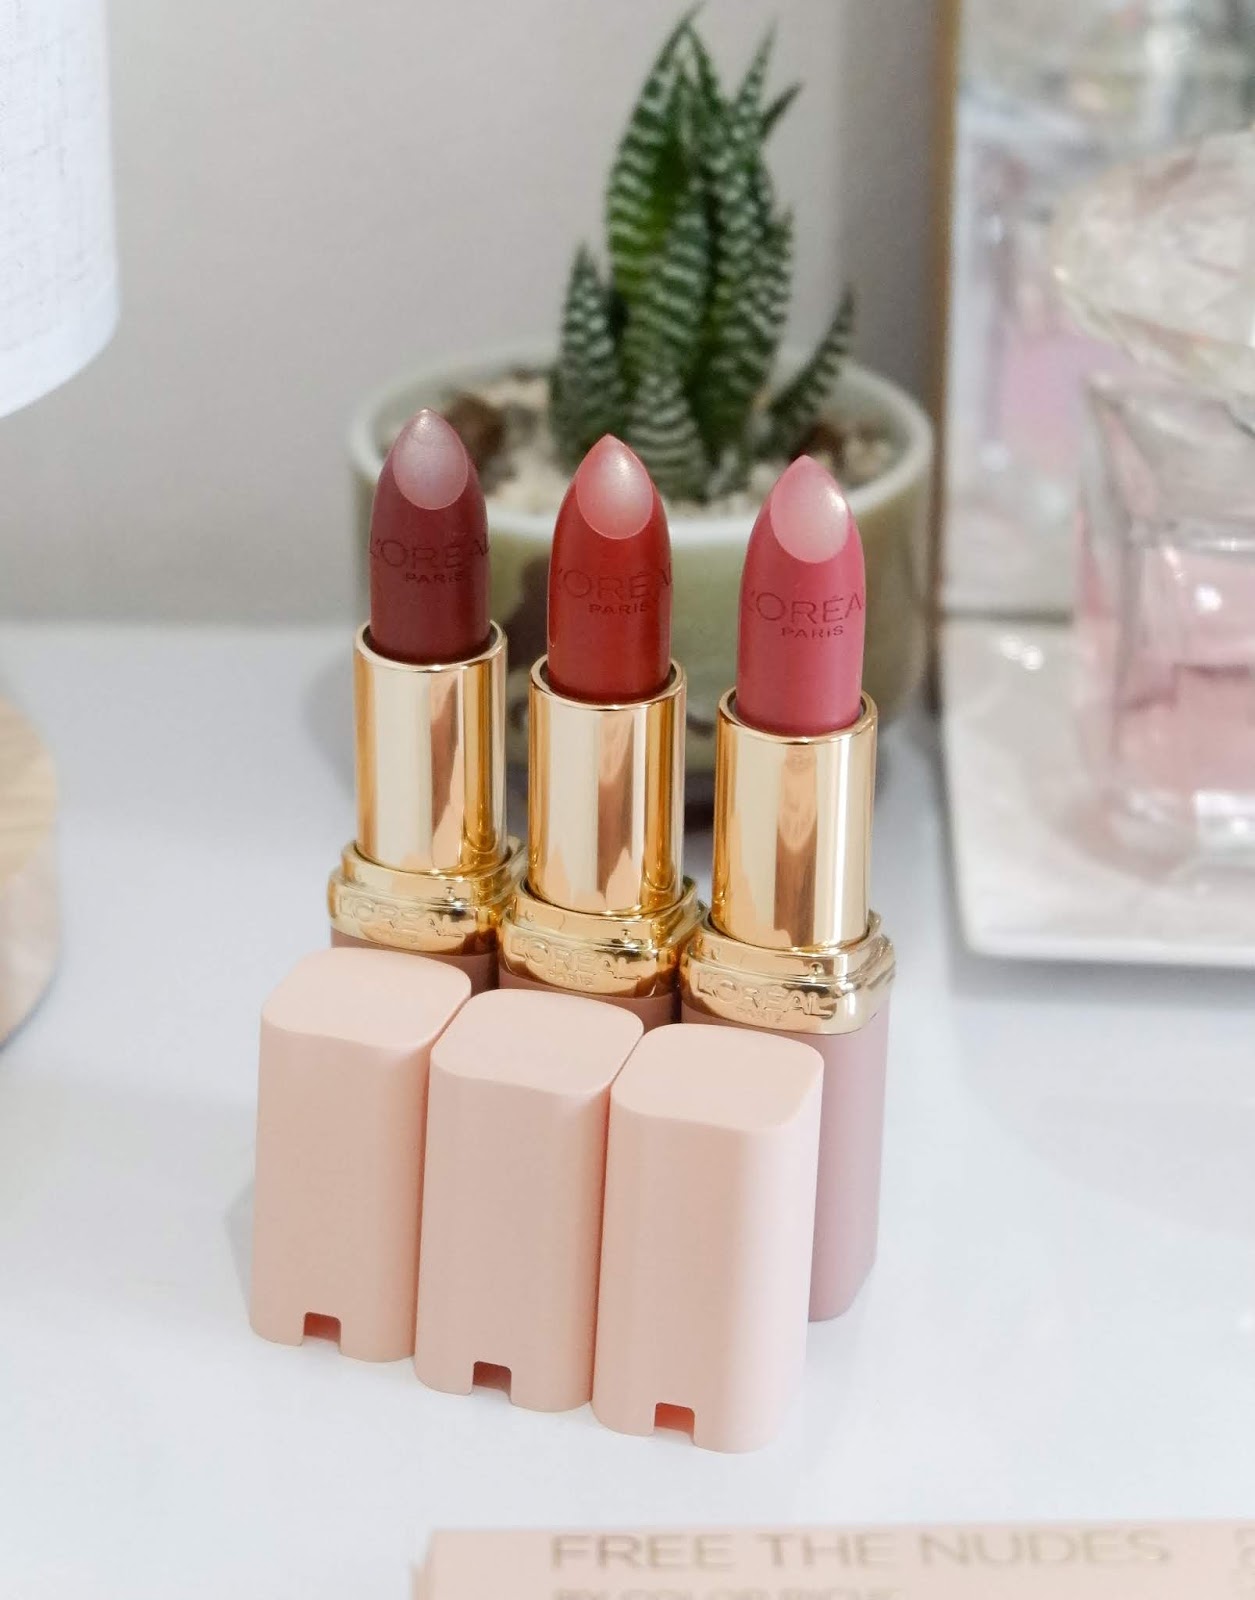 LOREAL PH COLOR RICHE FREE THE NUDES SWATCHES